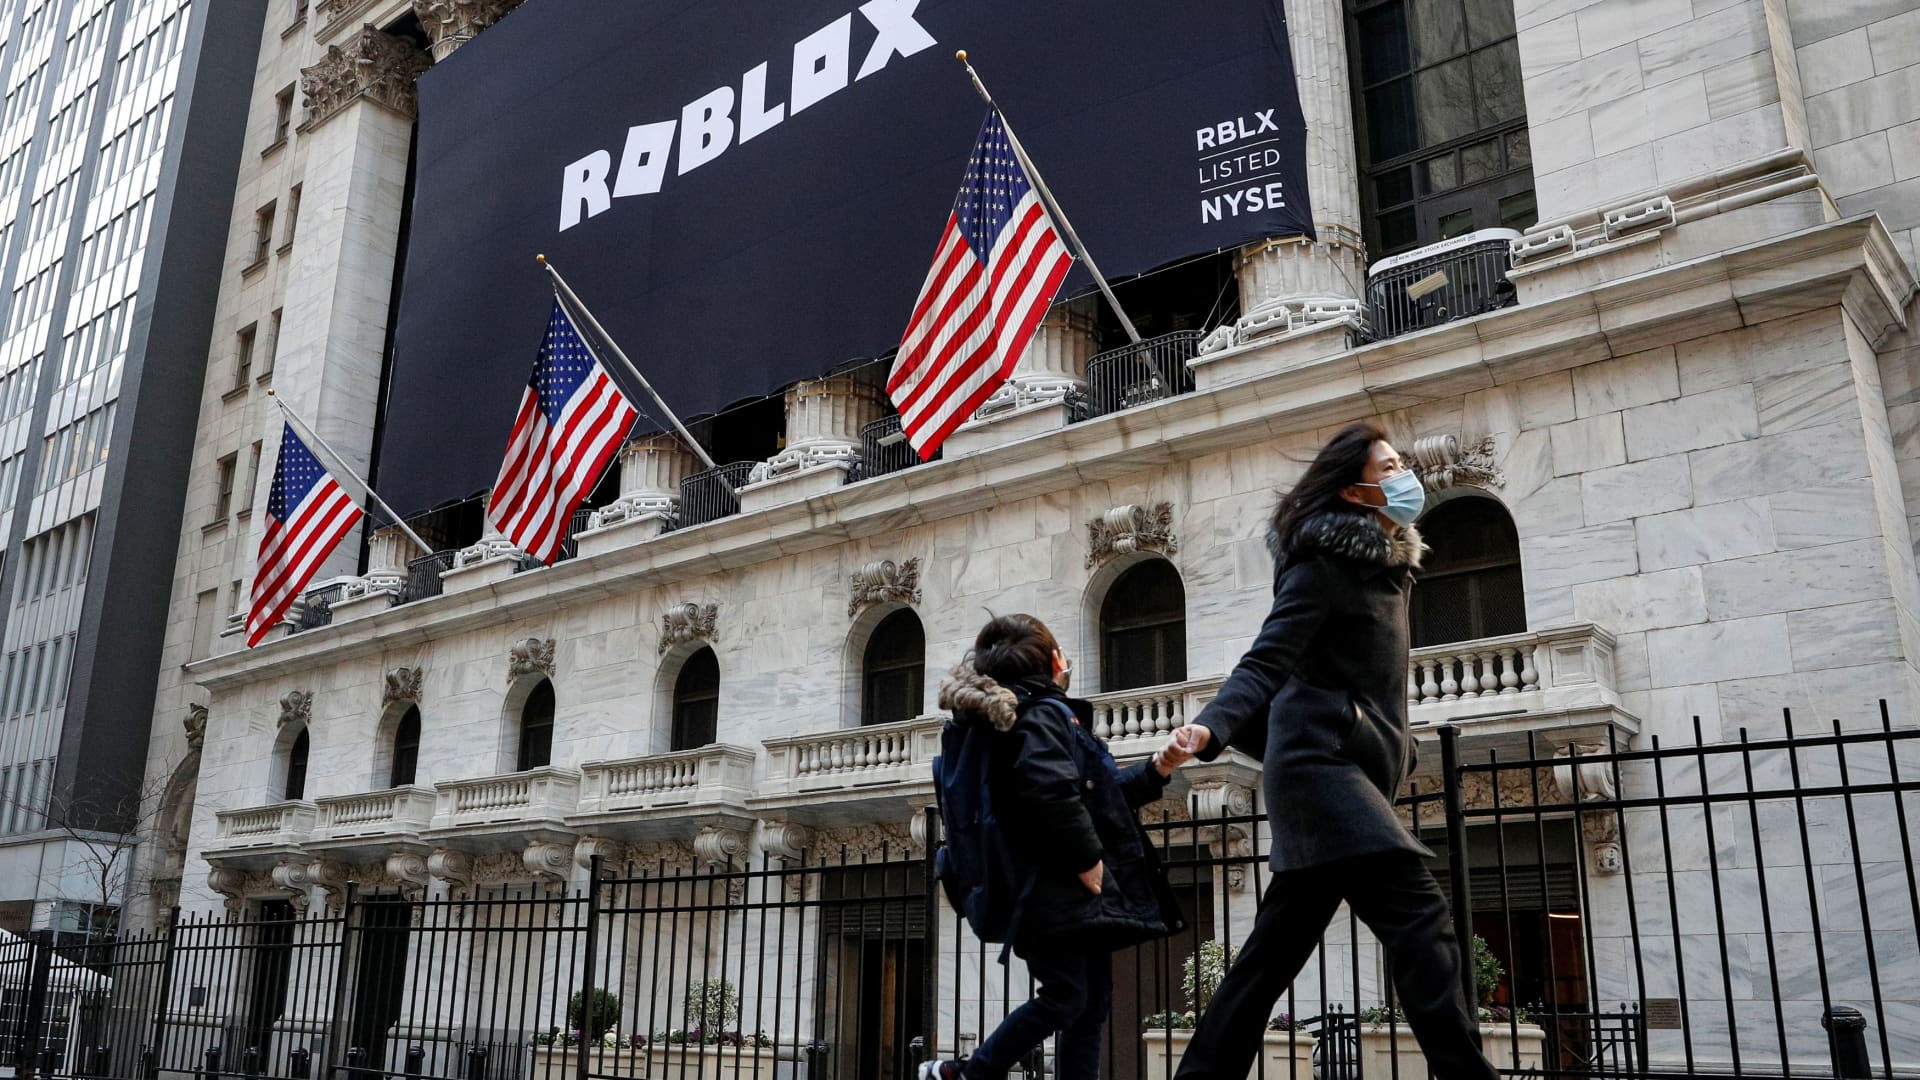 Roblox' contains a real money stock market aimed at children